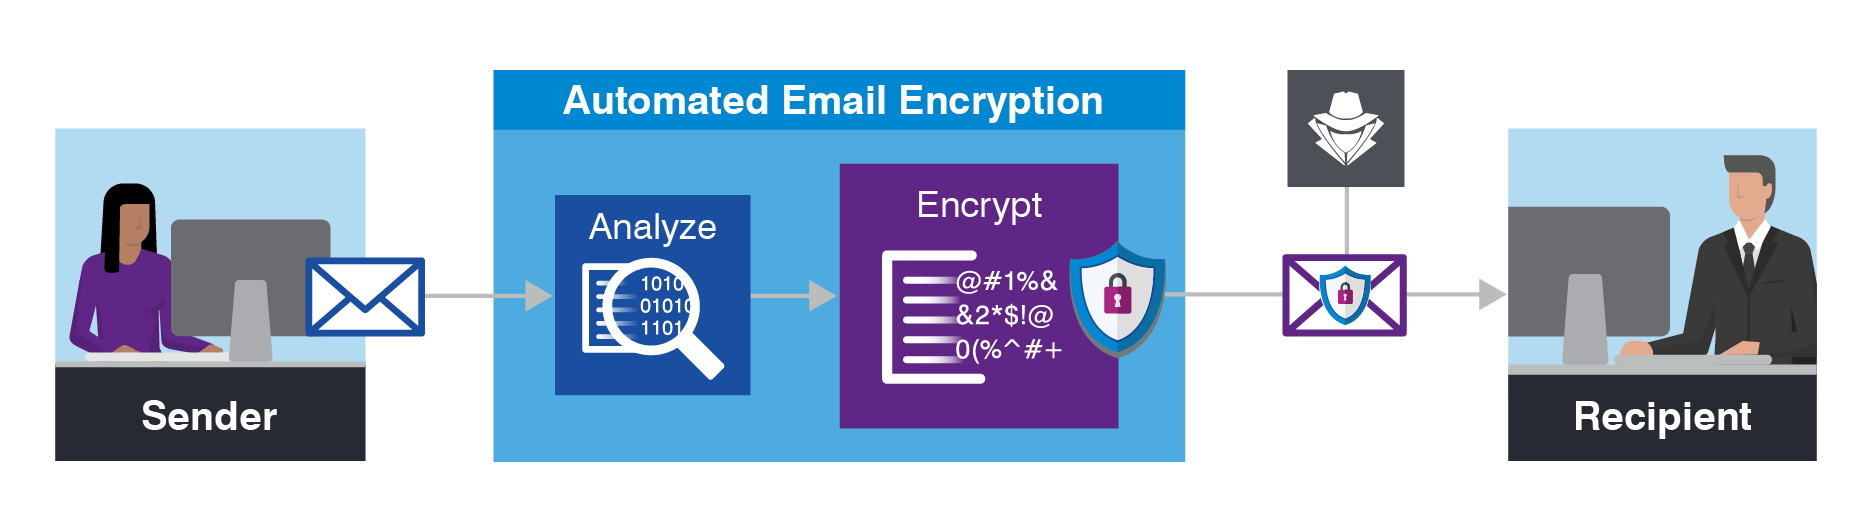 Email Security Best Practices - Auto Email Encryption